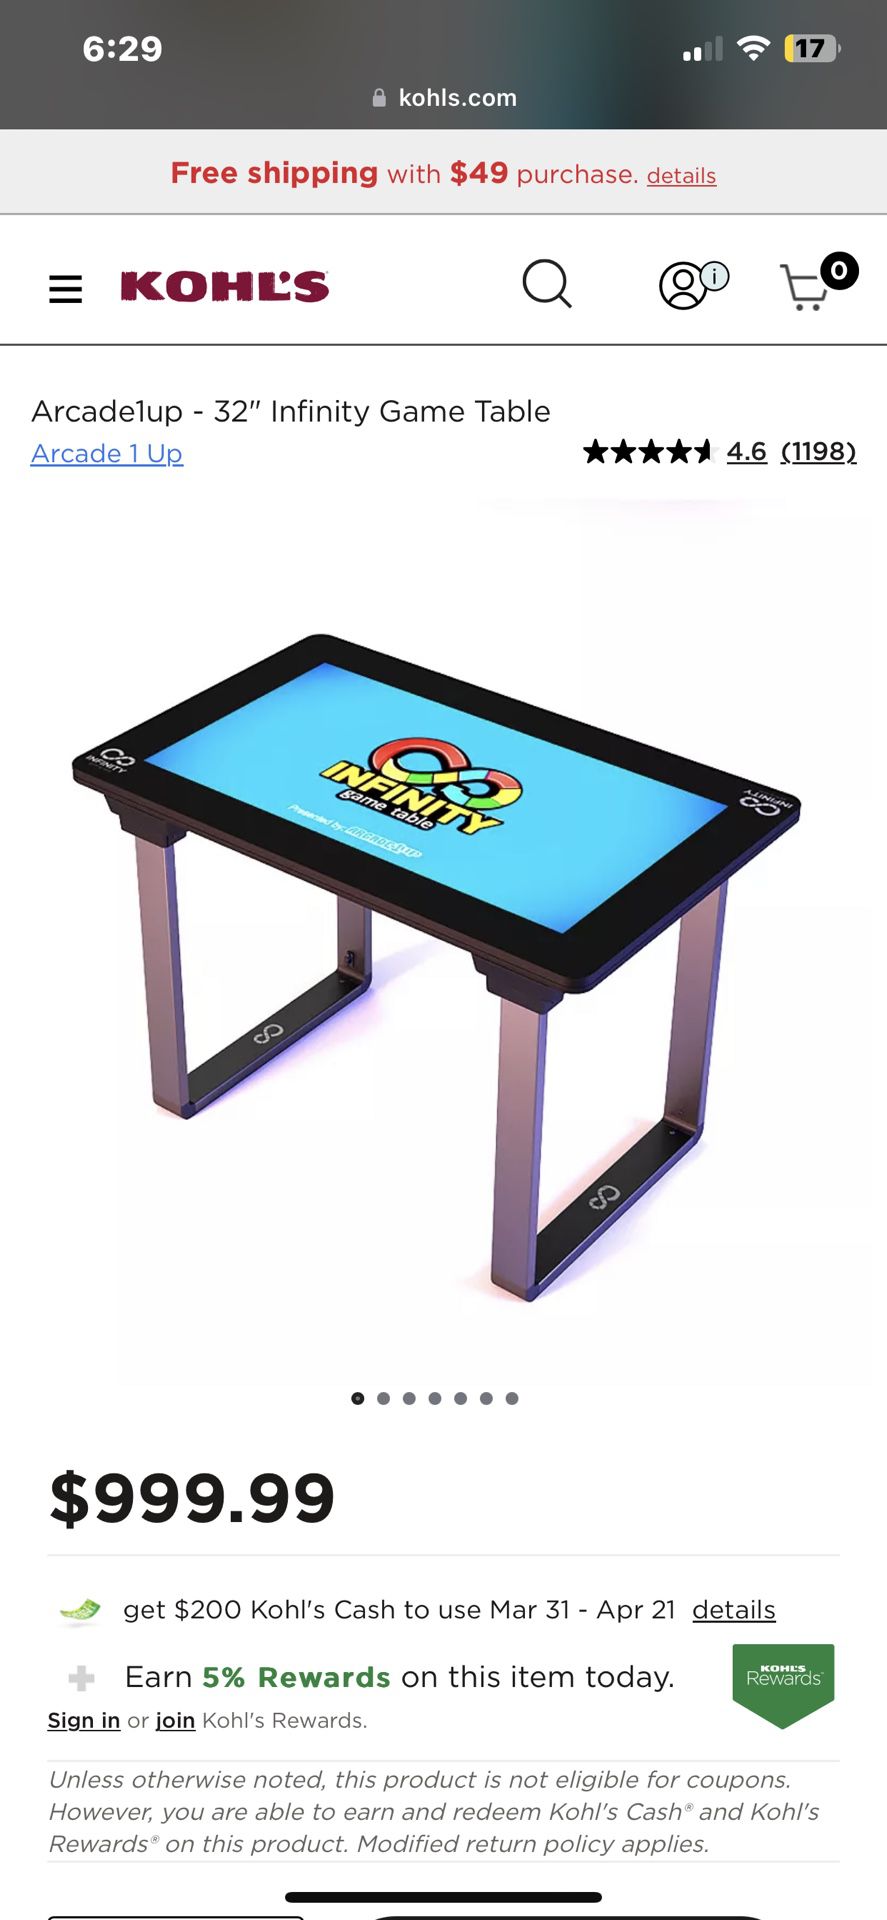 Arcade 1Up Infinity Game Table